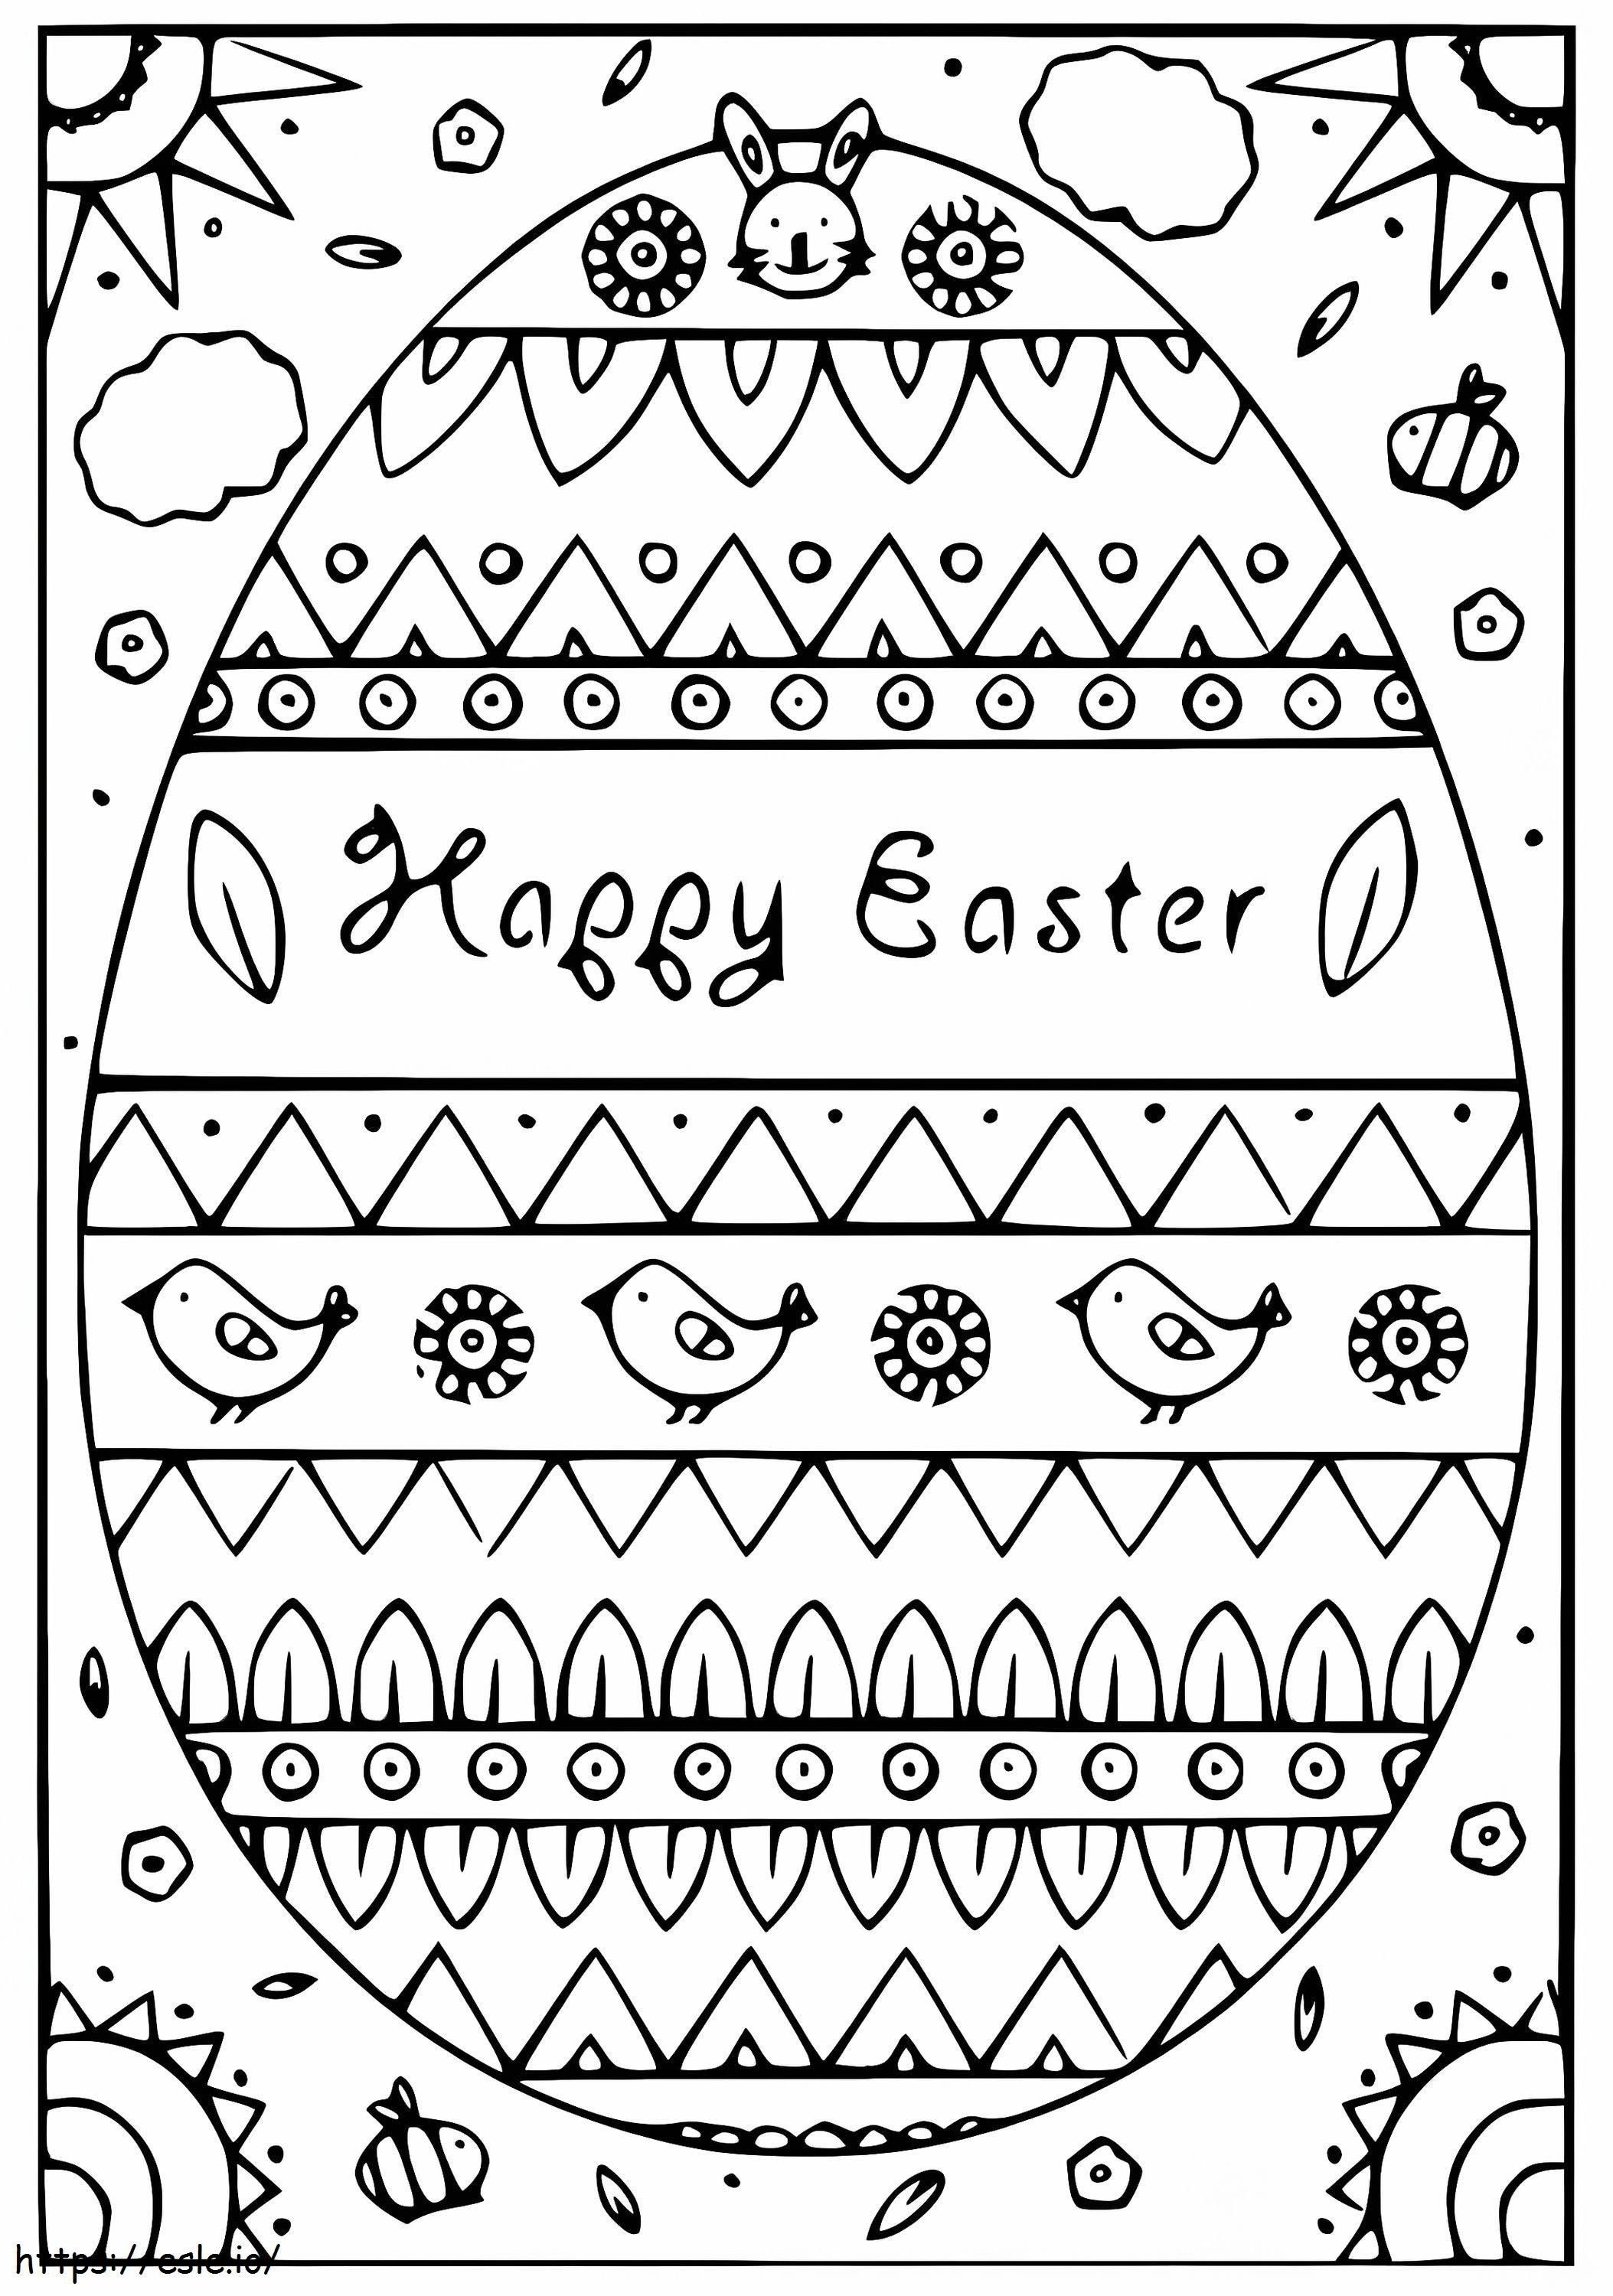 Free Printable Happy Easter Card coloring page